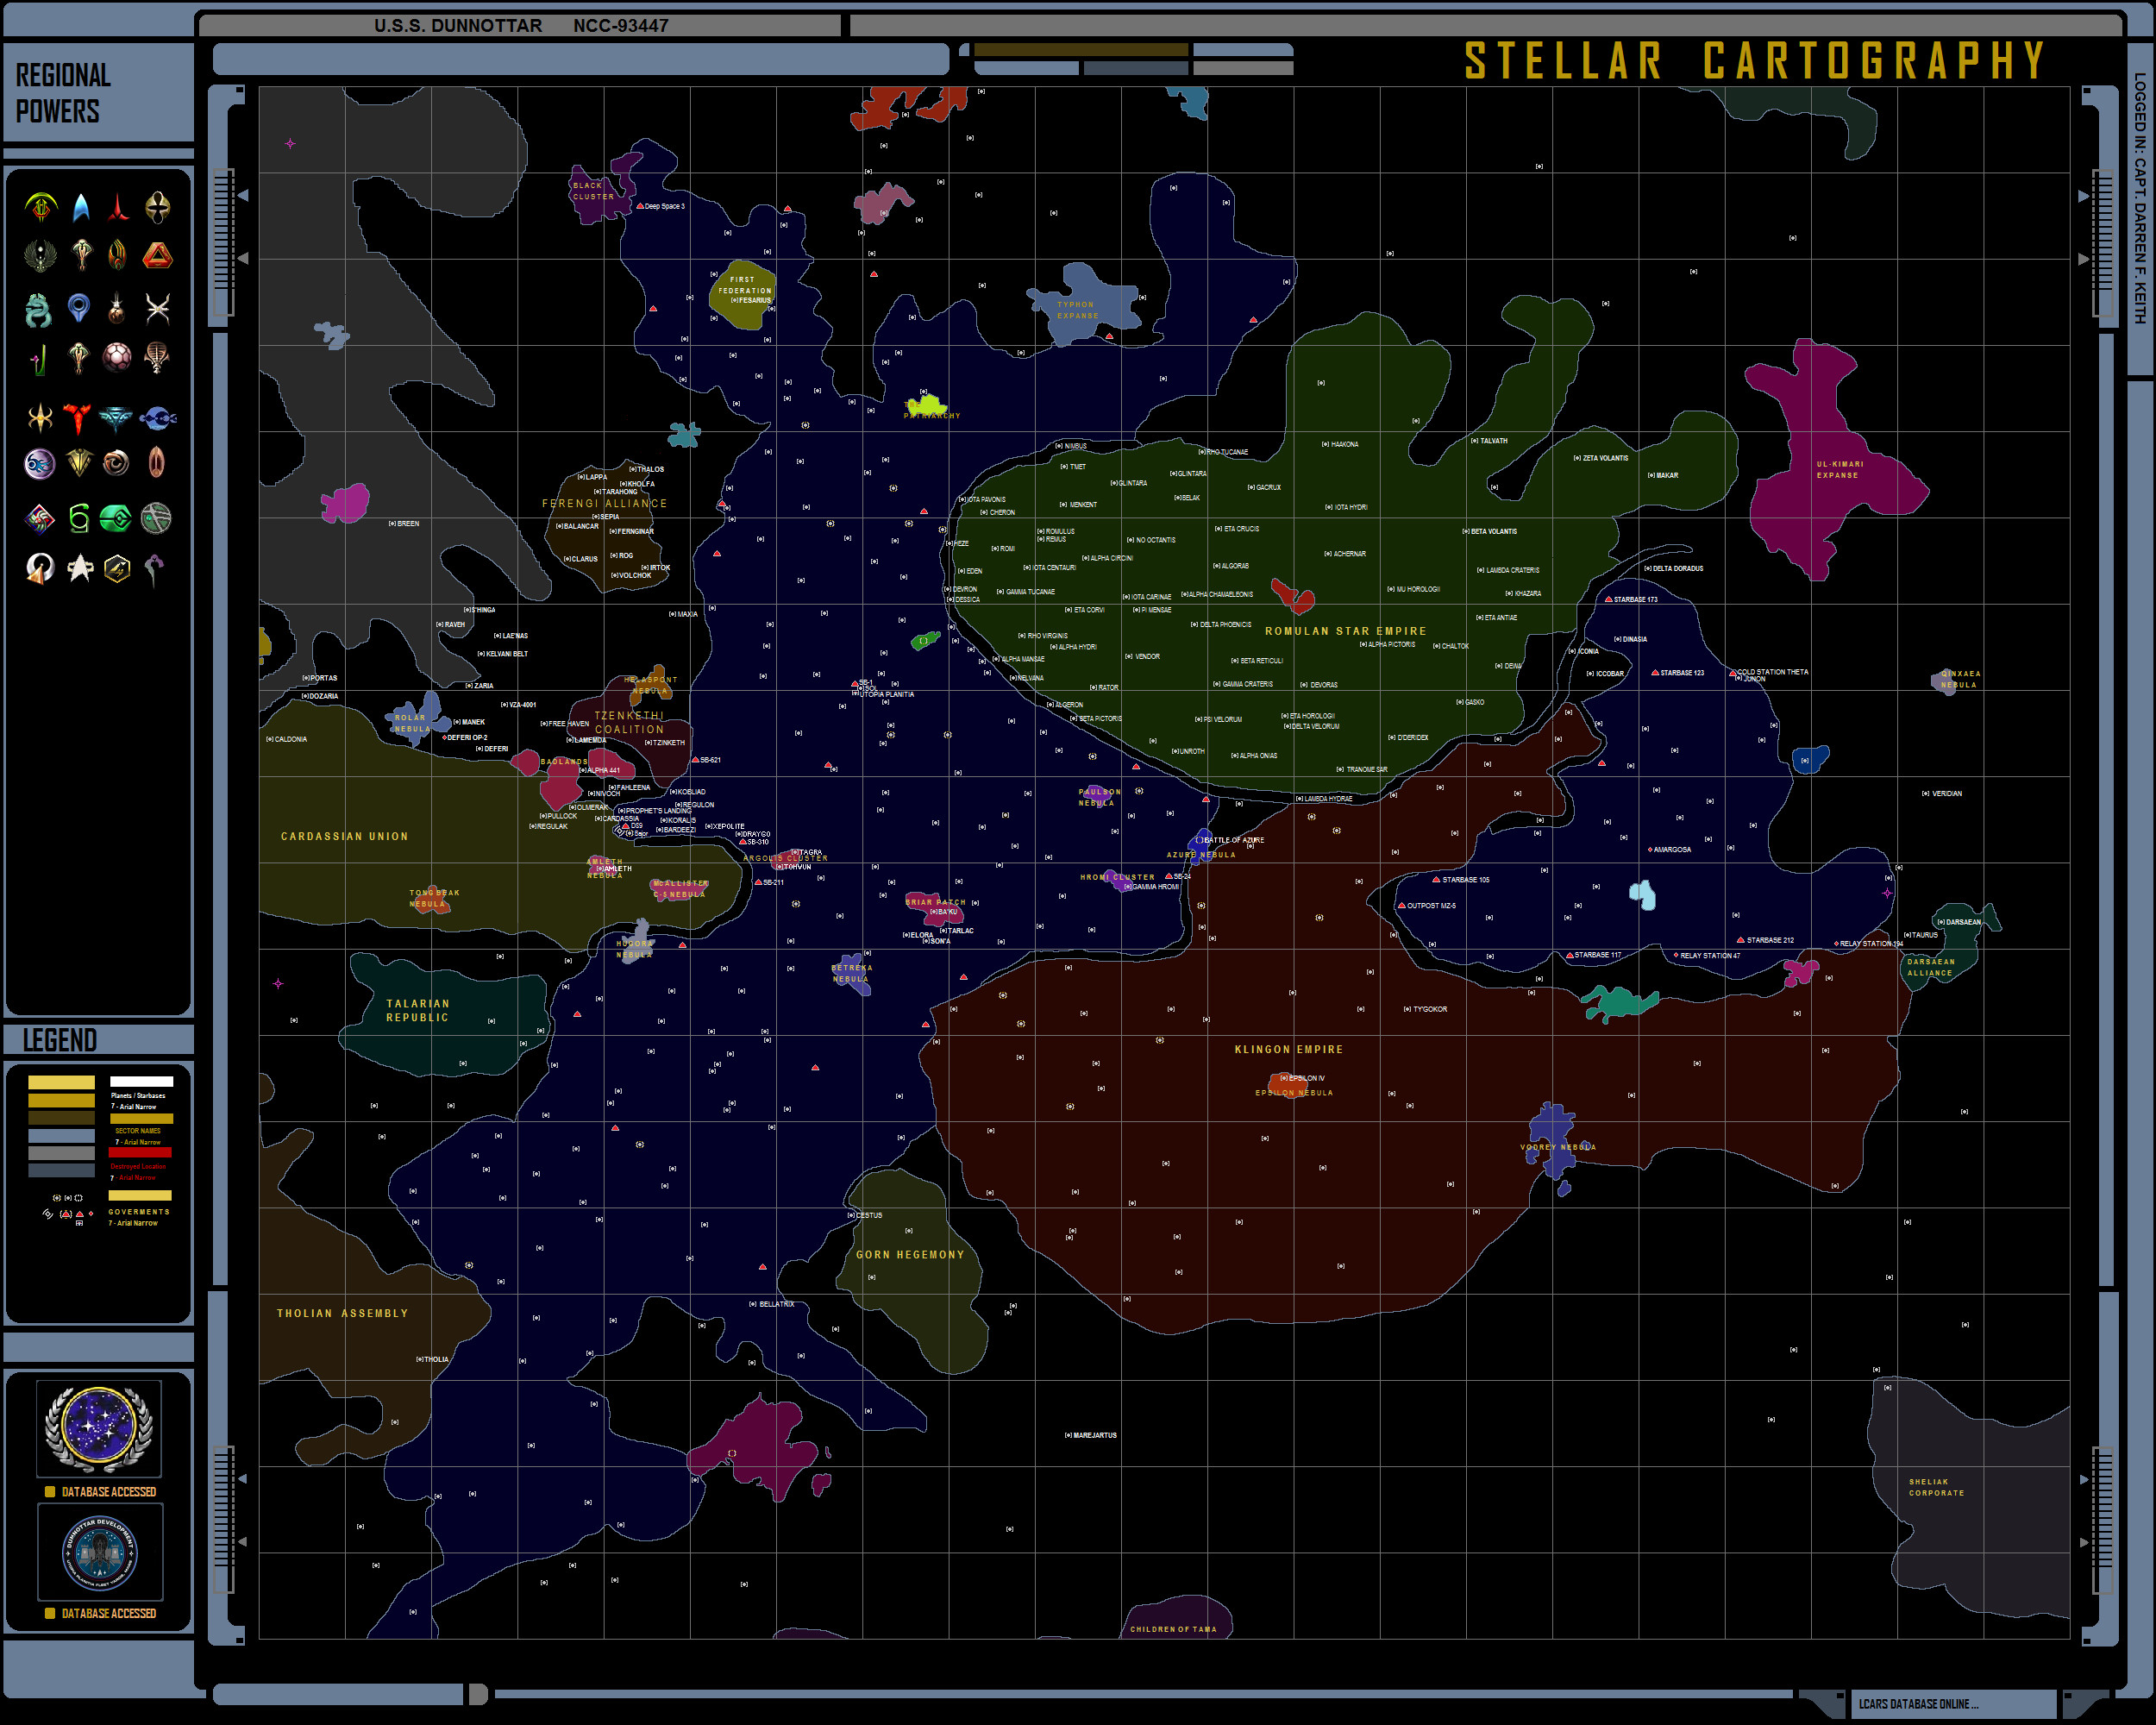 2500x2000 ... LCARS PADD Stellar Cartography WiP 2.4 by DKeith357